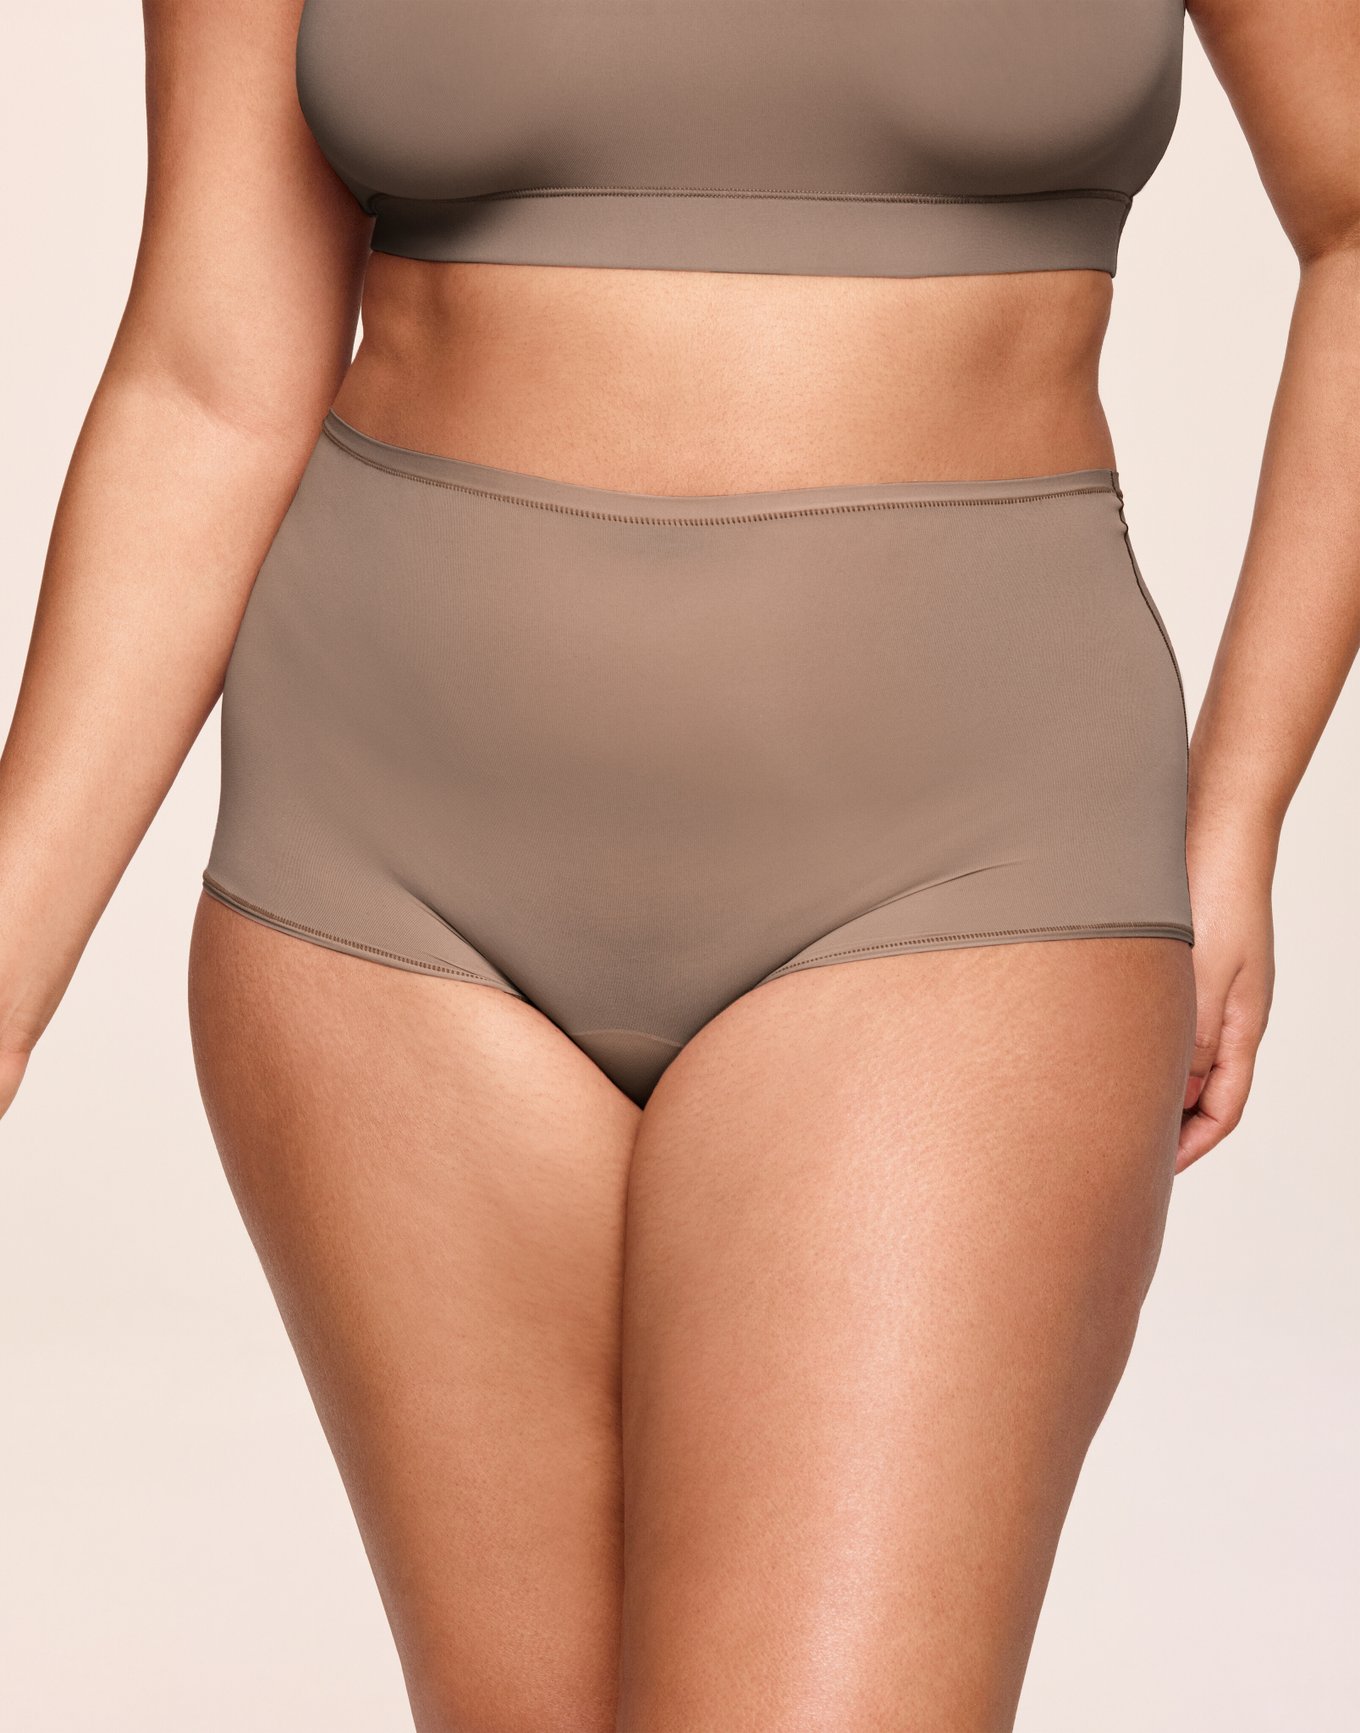 Seamless Nude Low Waist Panties For Women Quick Drying T Pants